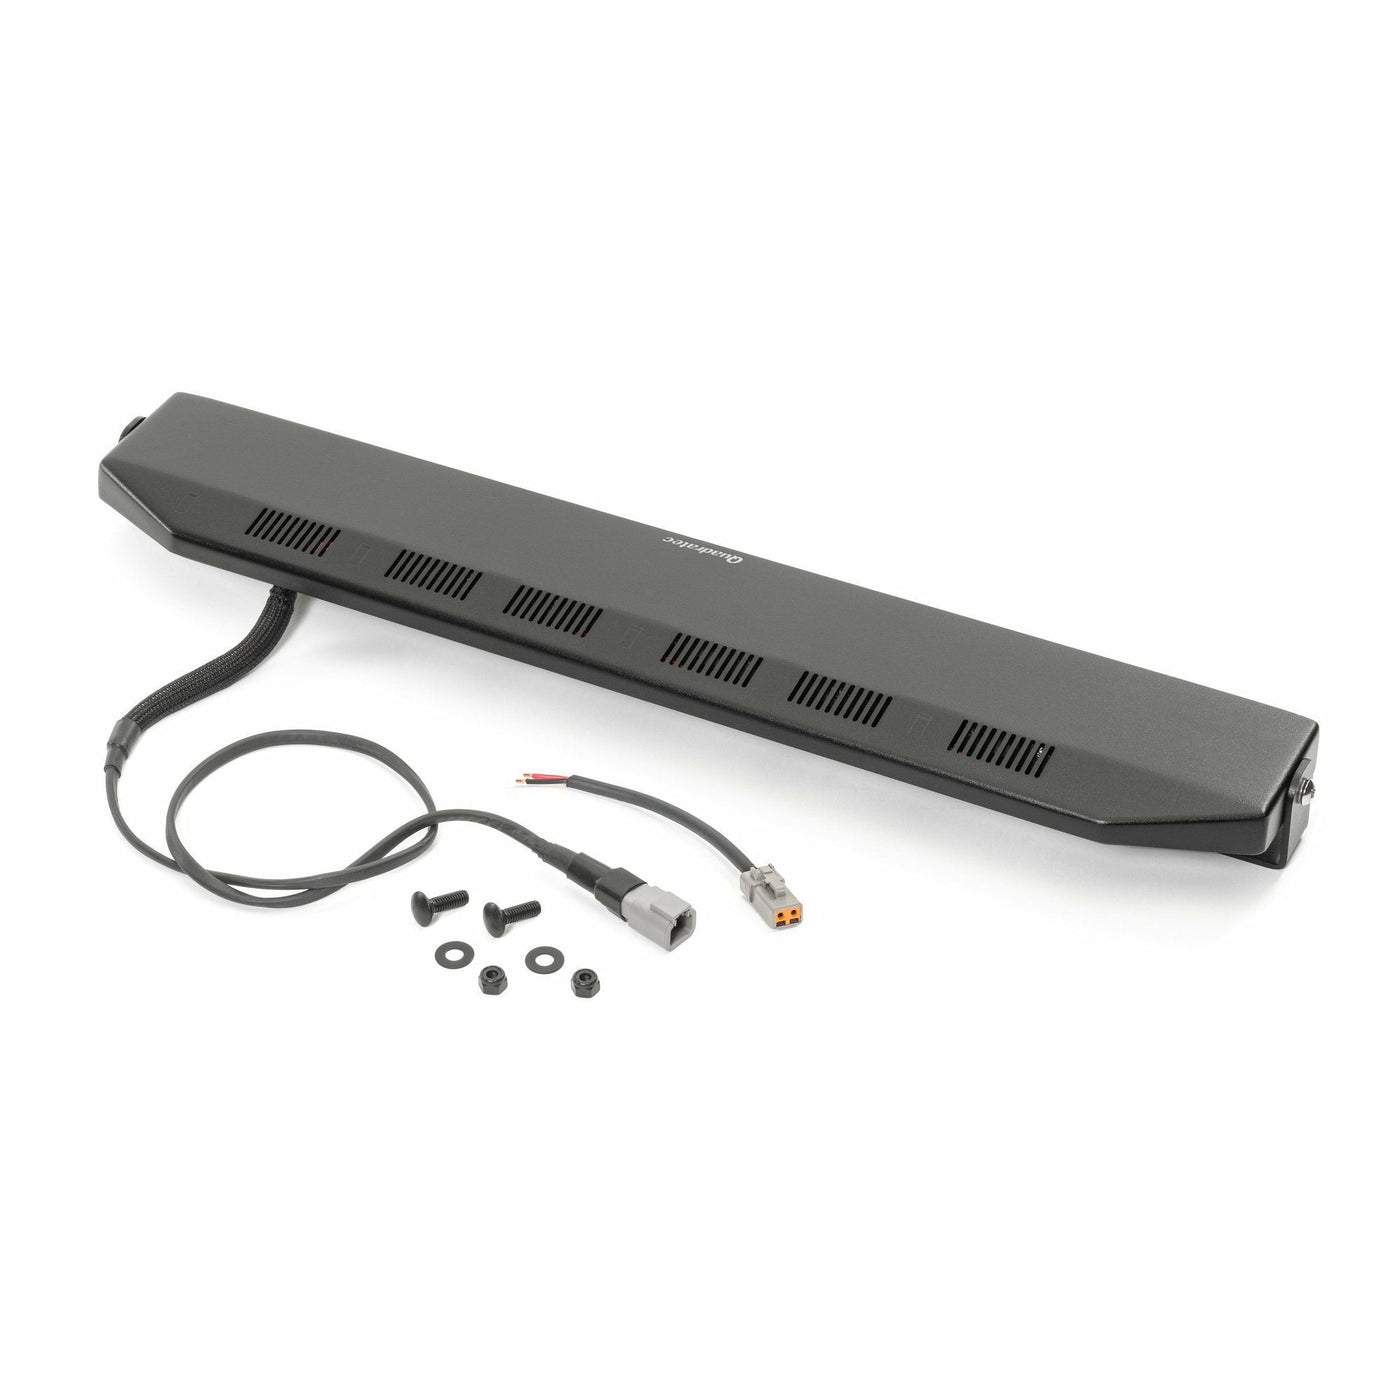 Quadratec Stealth 27" LED Light Bar with Hood Mount Brackets and Wiring for 07-18 Jeep Wrangler JK